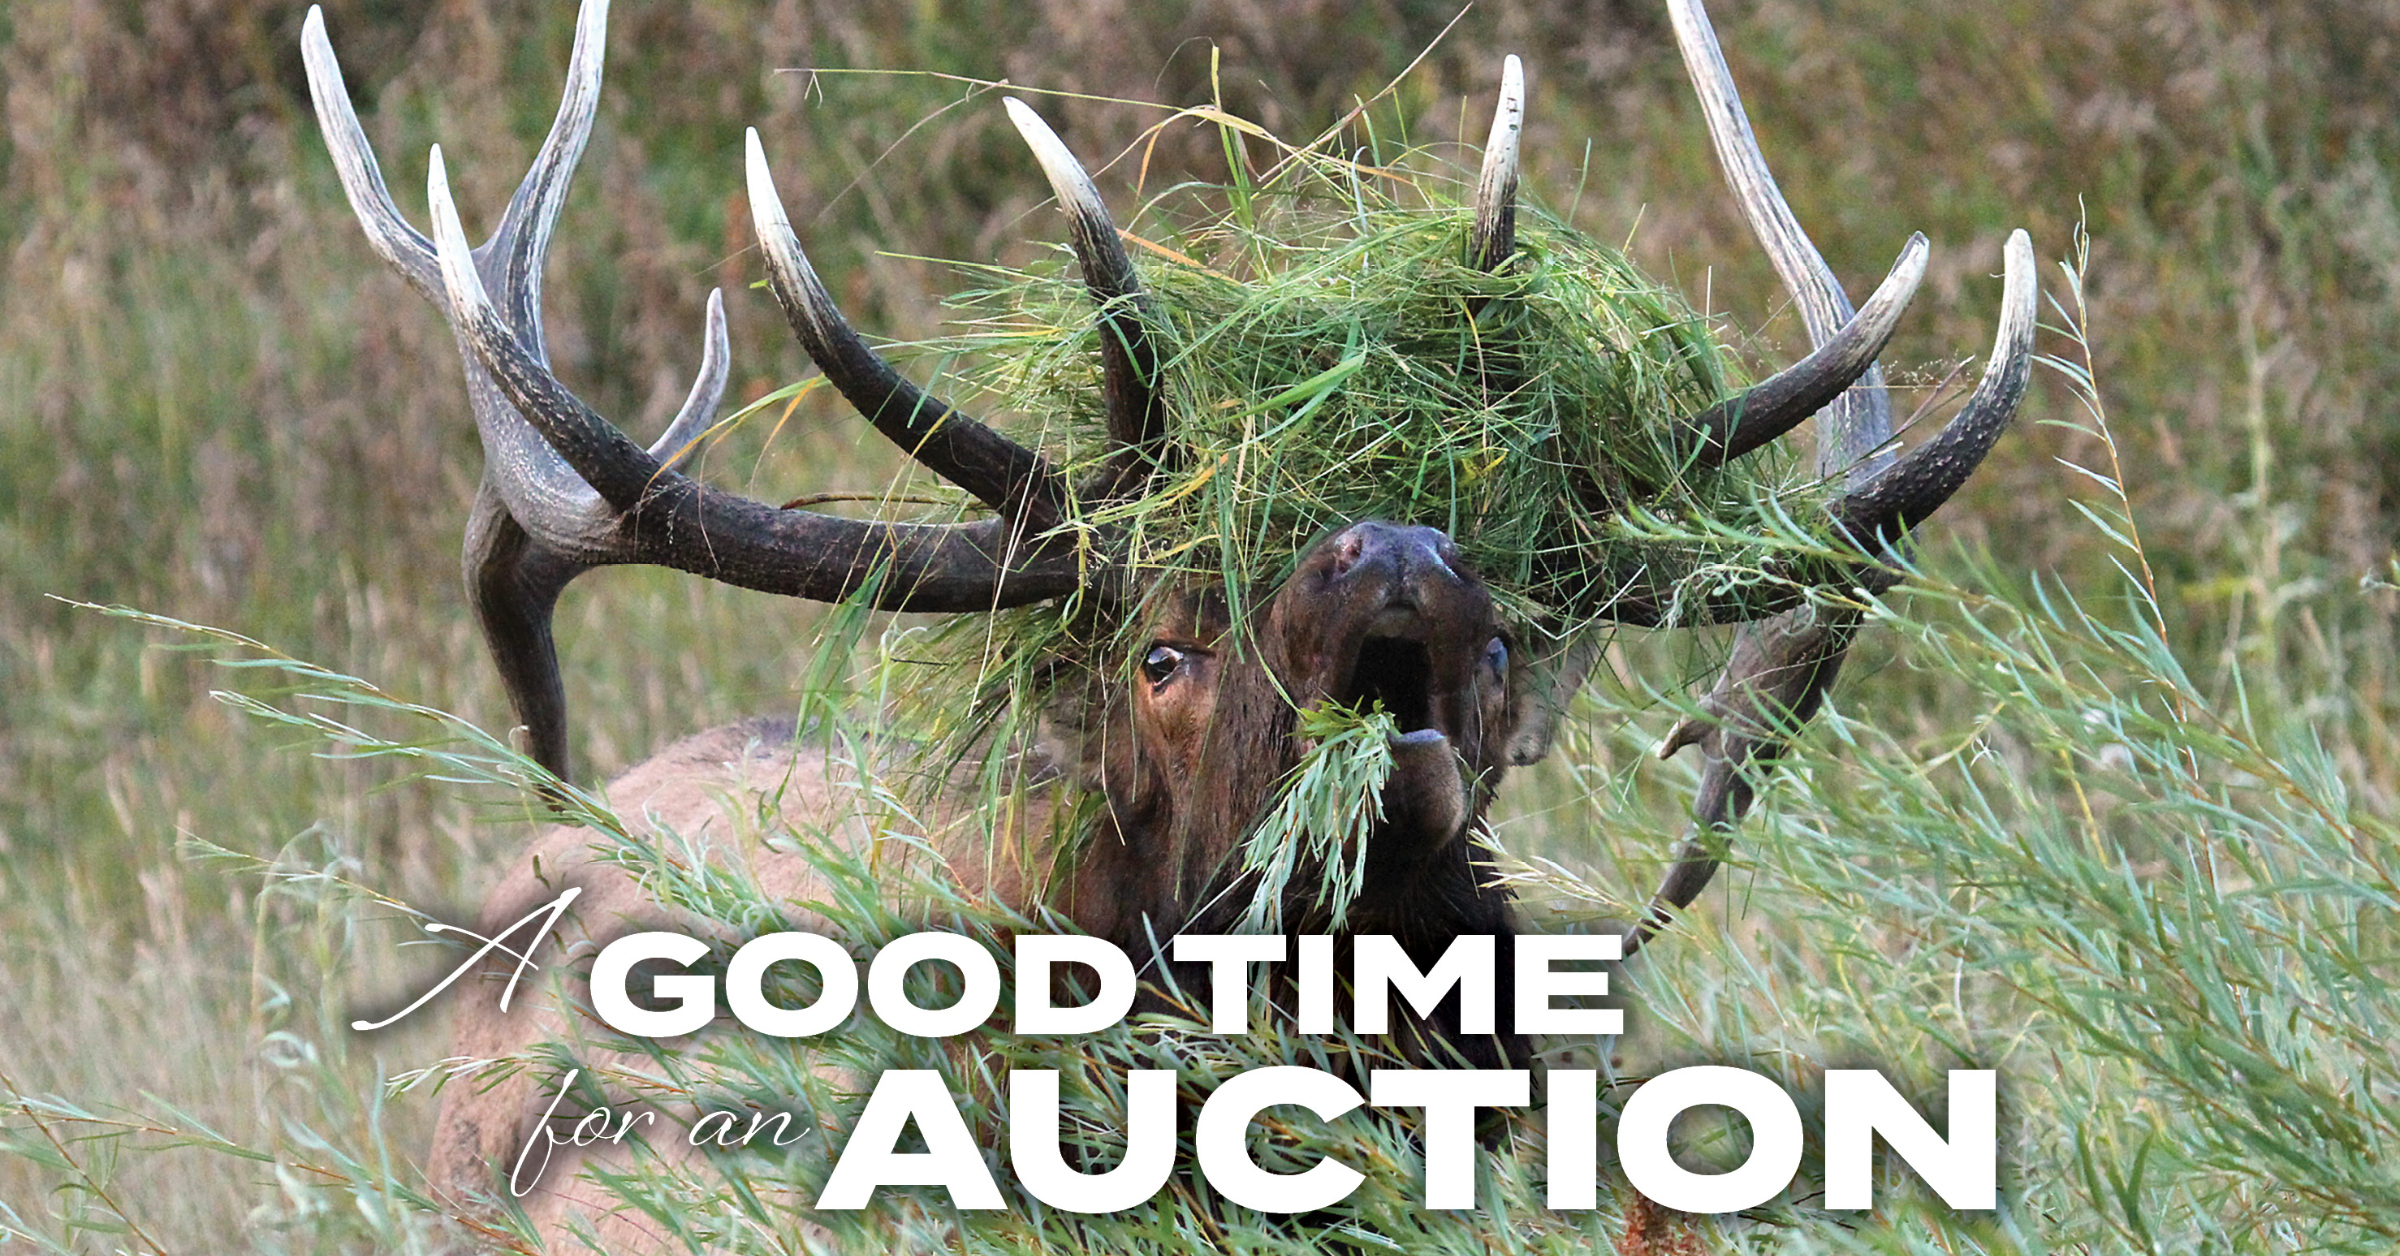 auctions.rmef.org